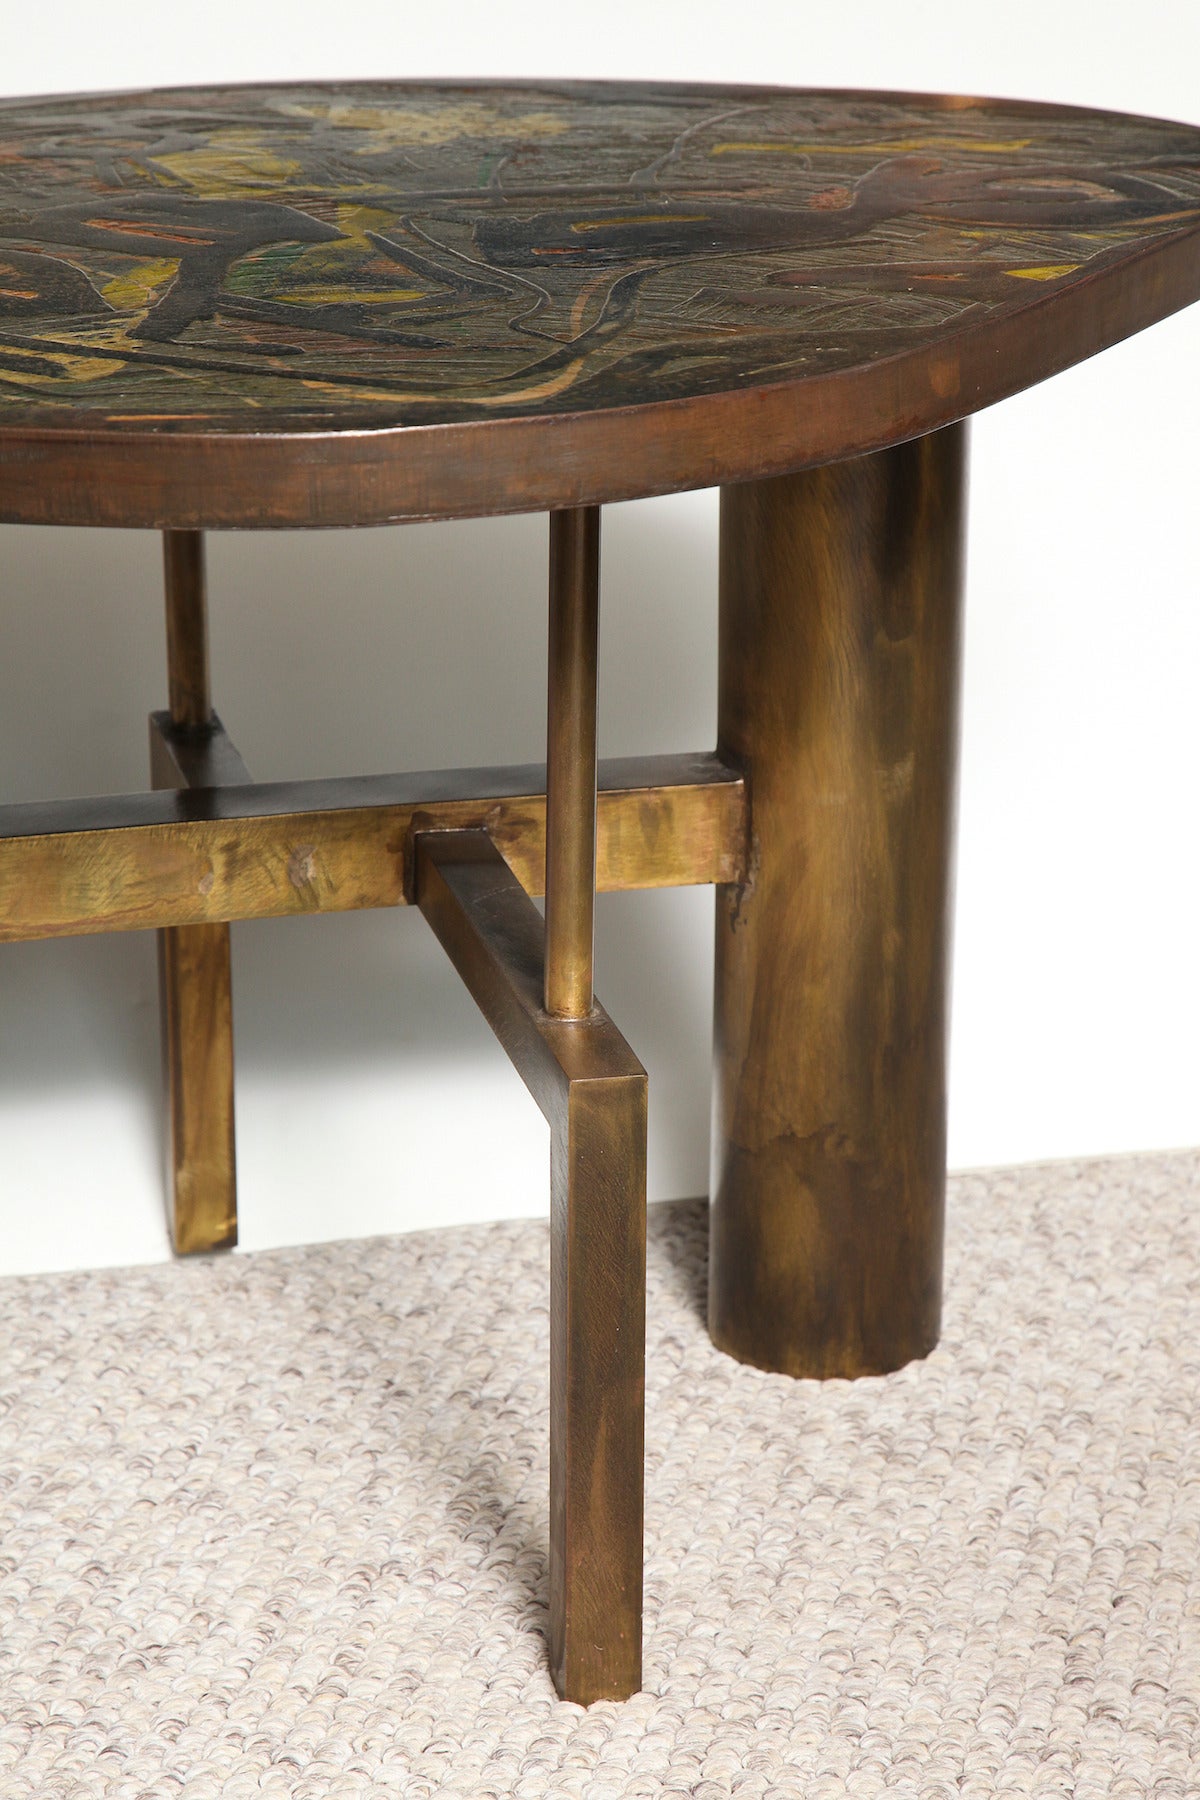 Architectural bronze structure with extraordinary irregular top created in two layers. Bottom layer in pewter with incised lines and splashes of colored enamel, overlaid with sheets of patinated bronze in abstract shapes. This table was created